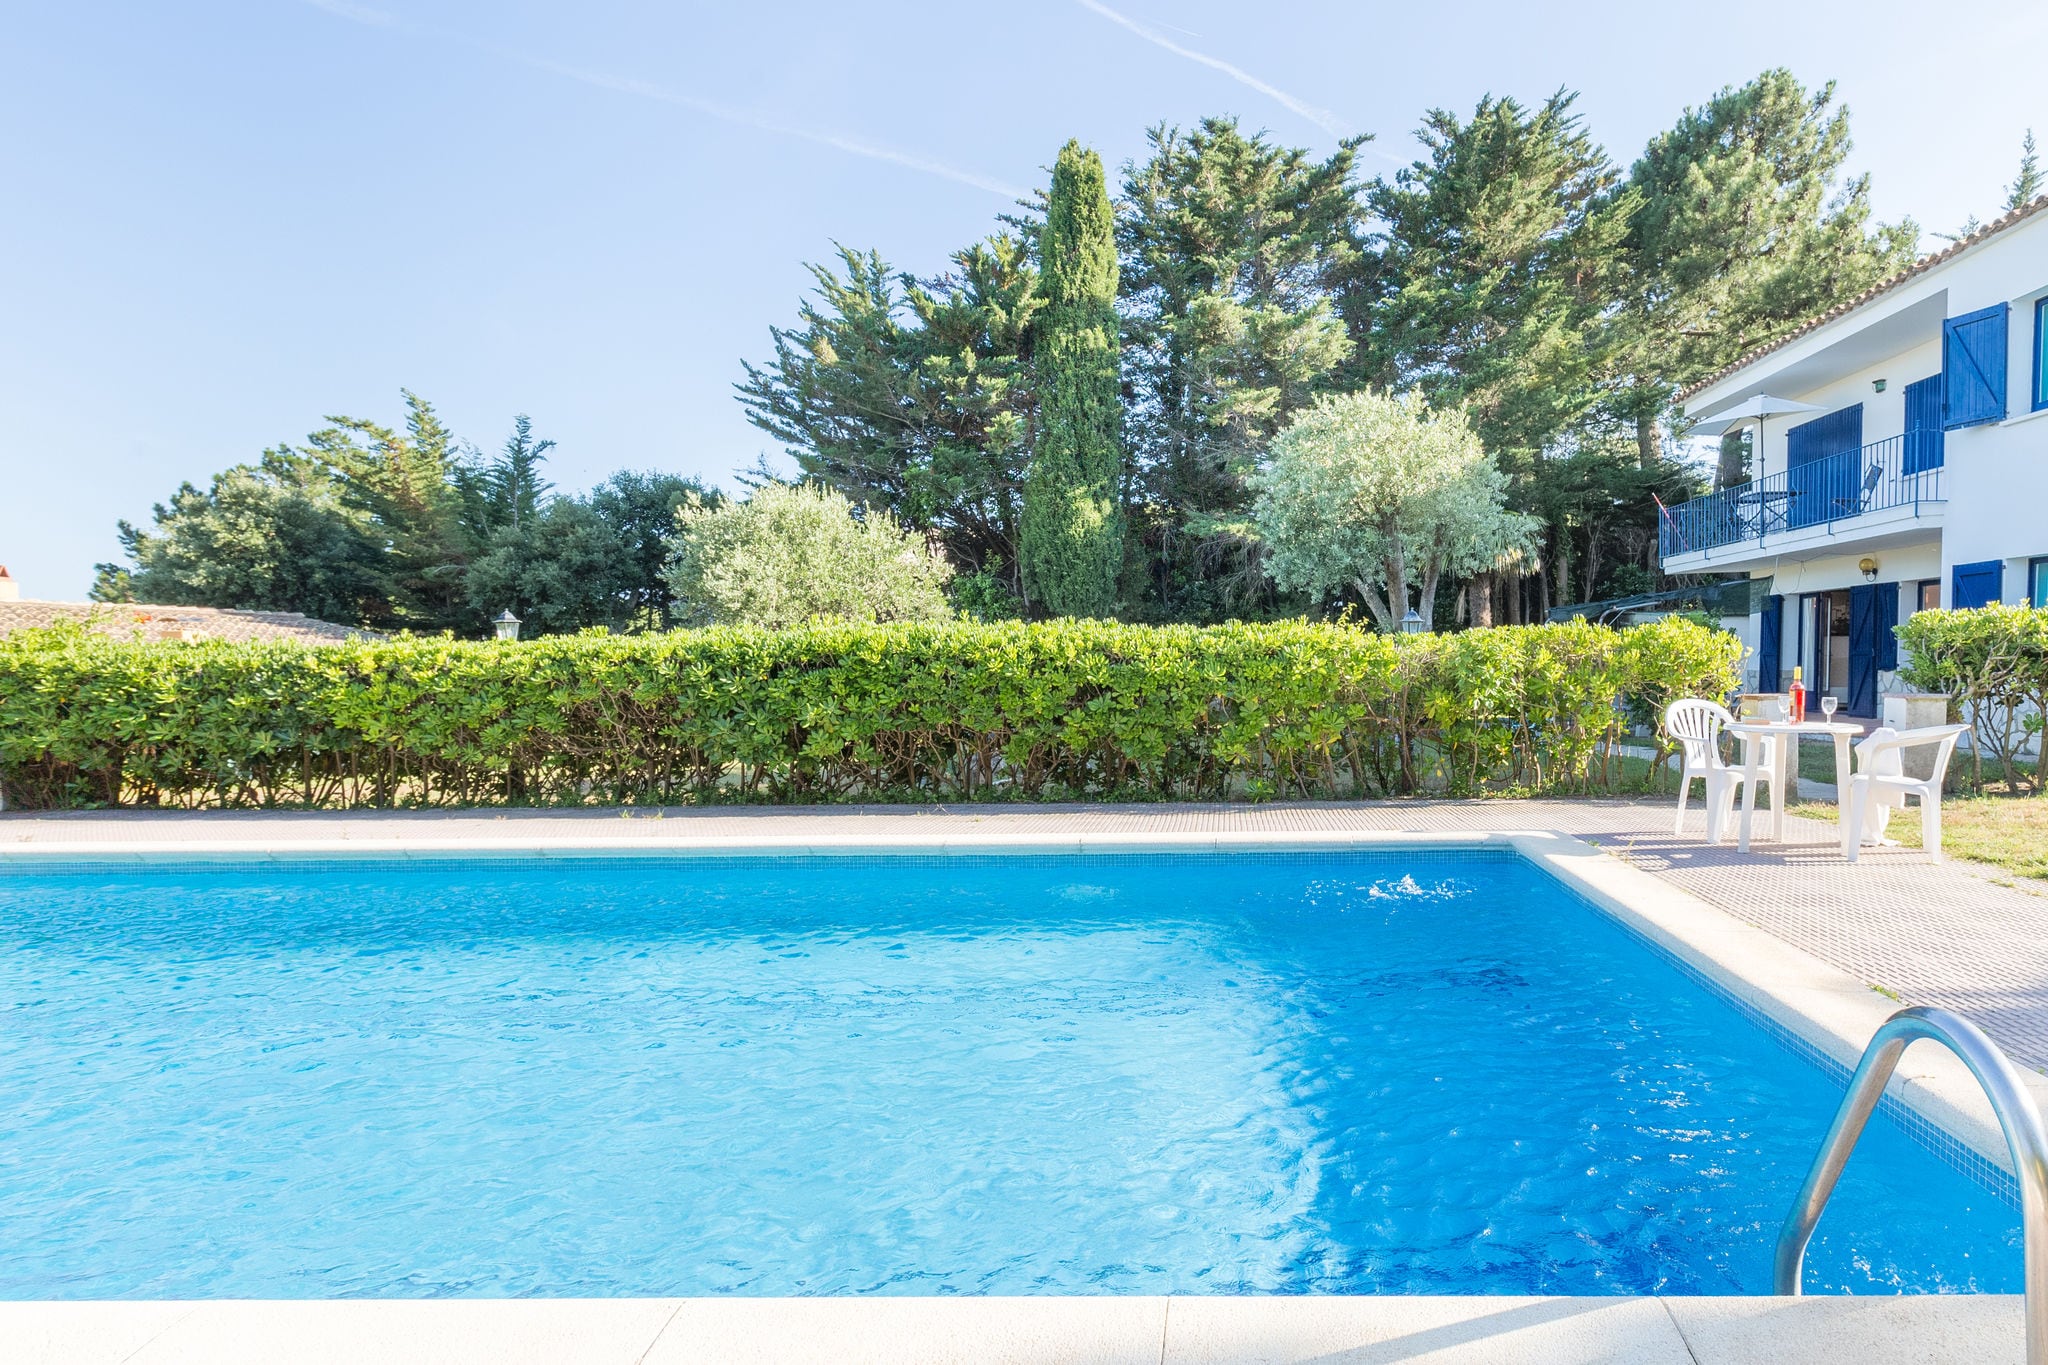 Garden-View Apartment in Calella de Palafrugell with Swimming Pool